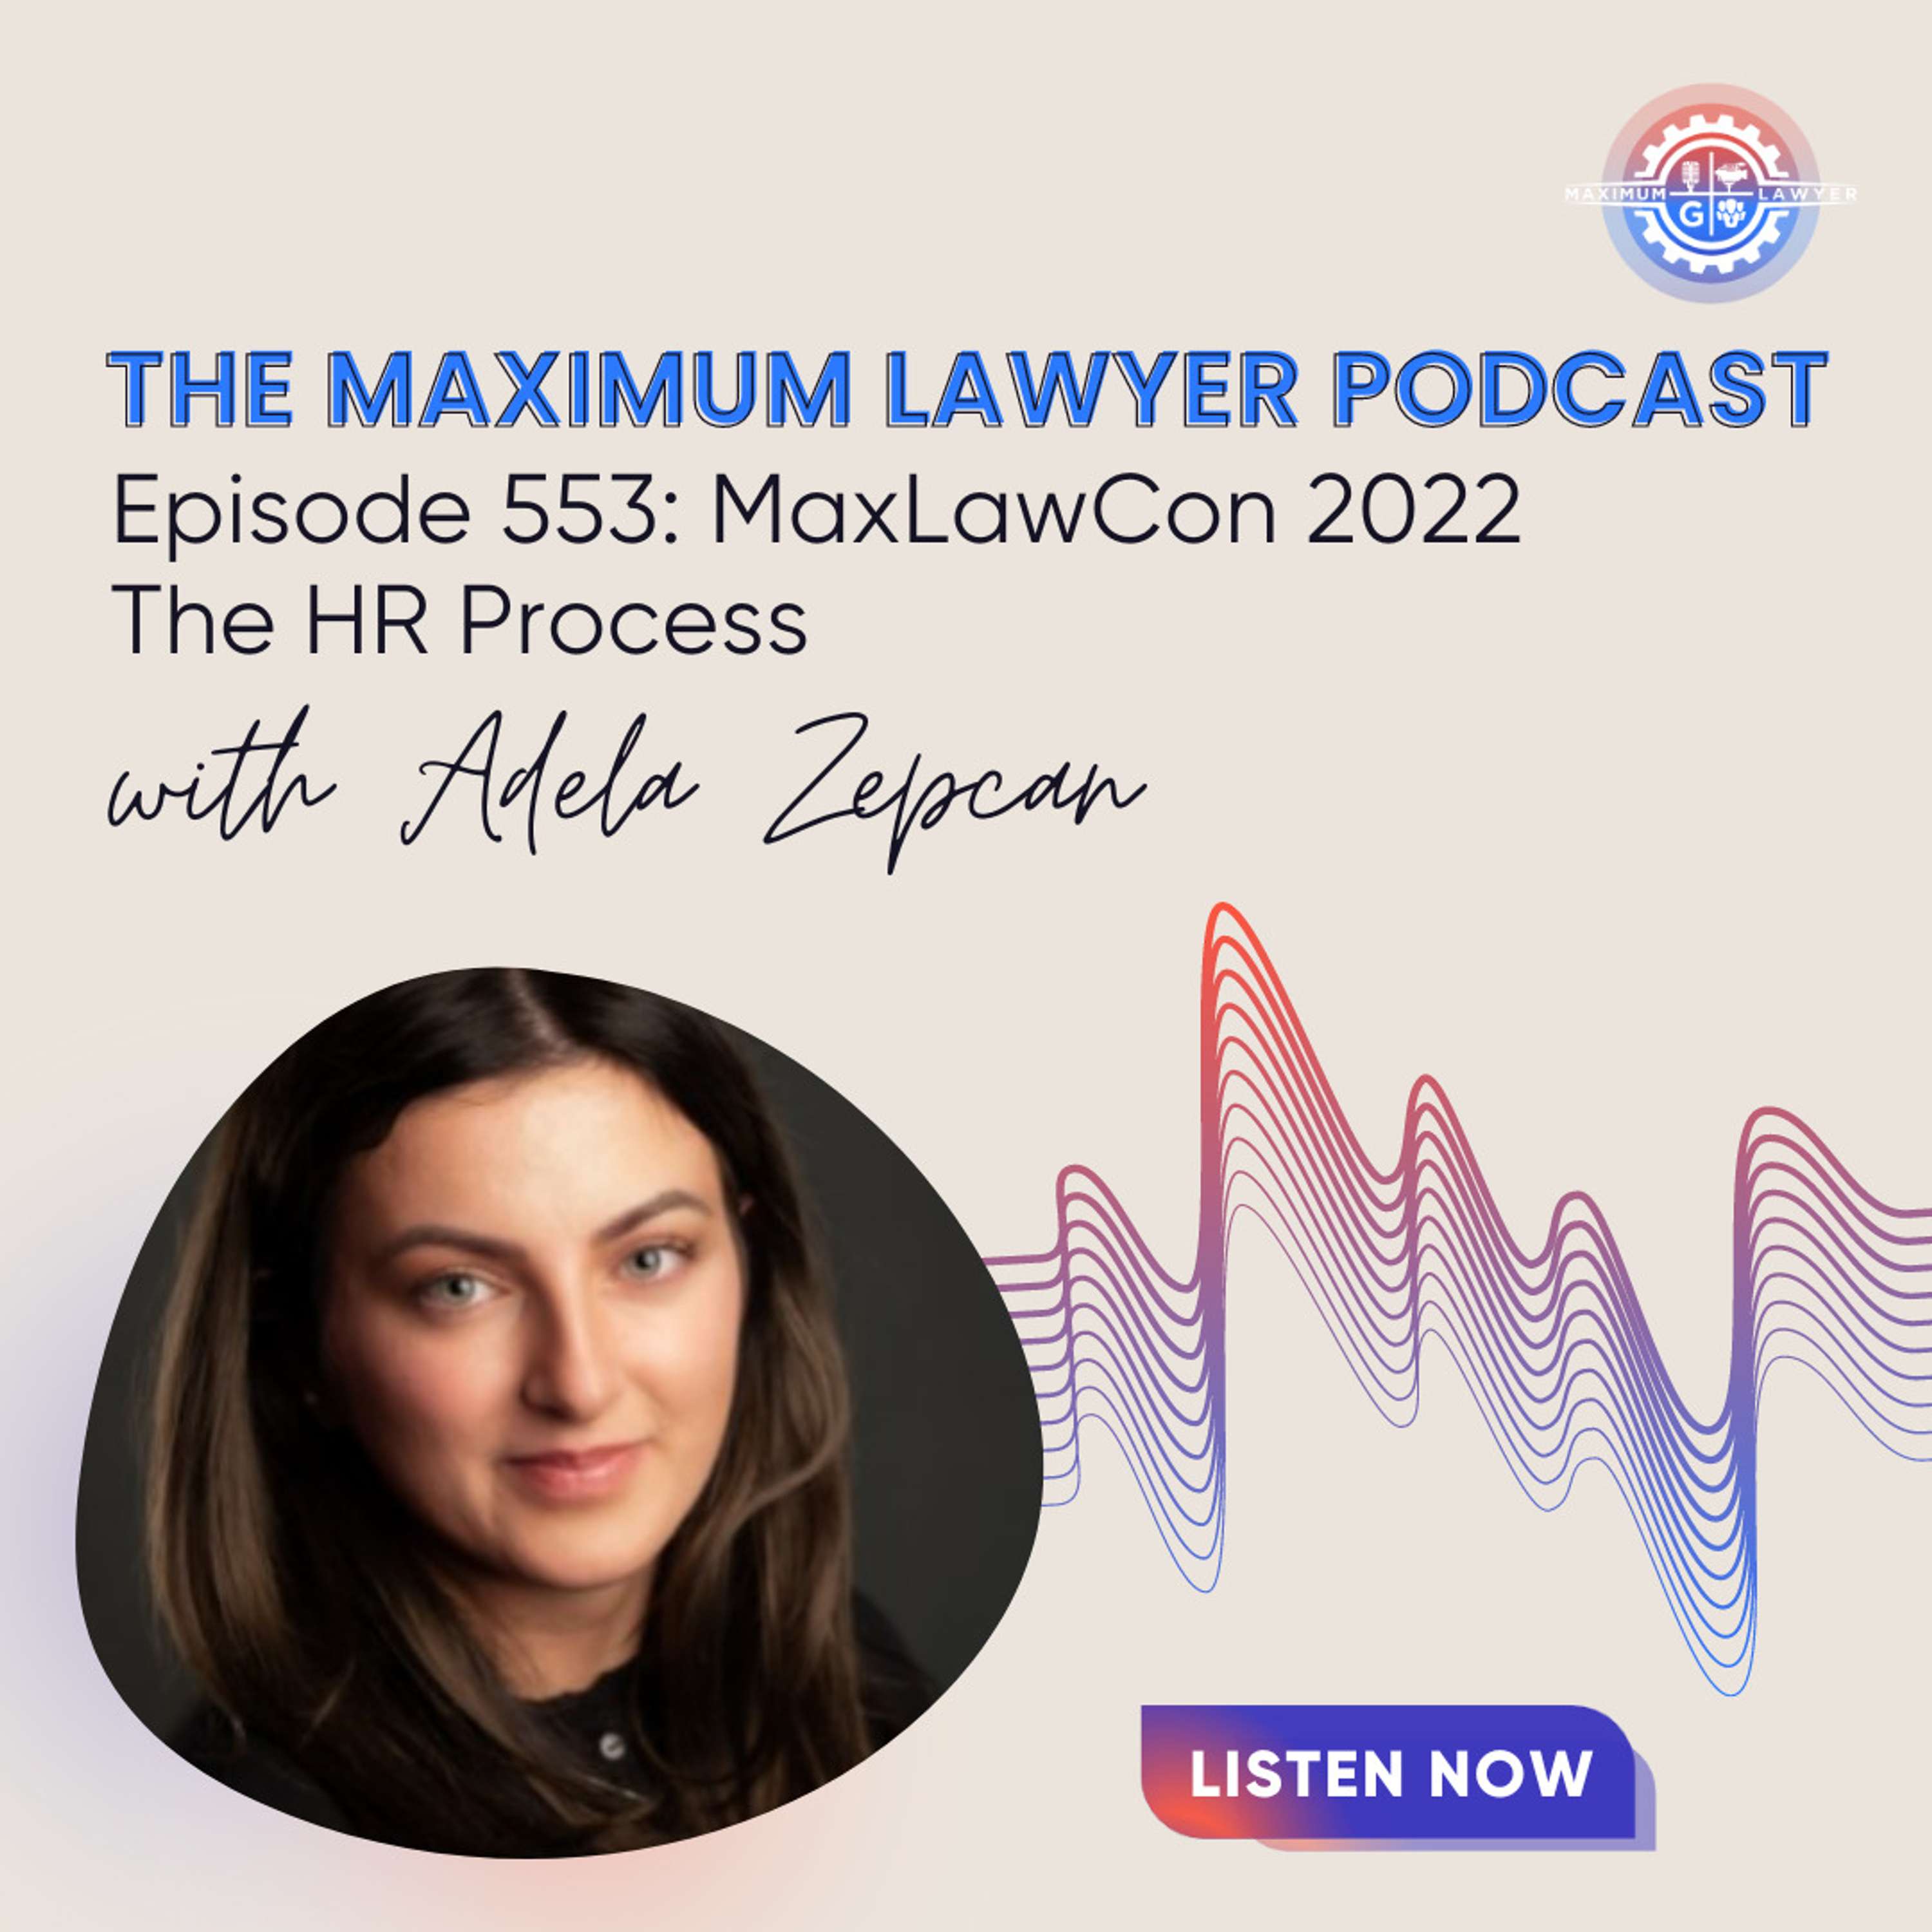 The HR Process with Adela Zepcan